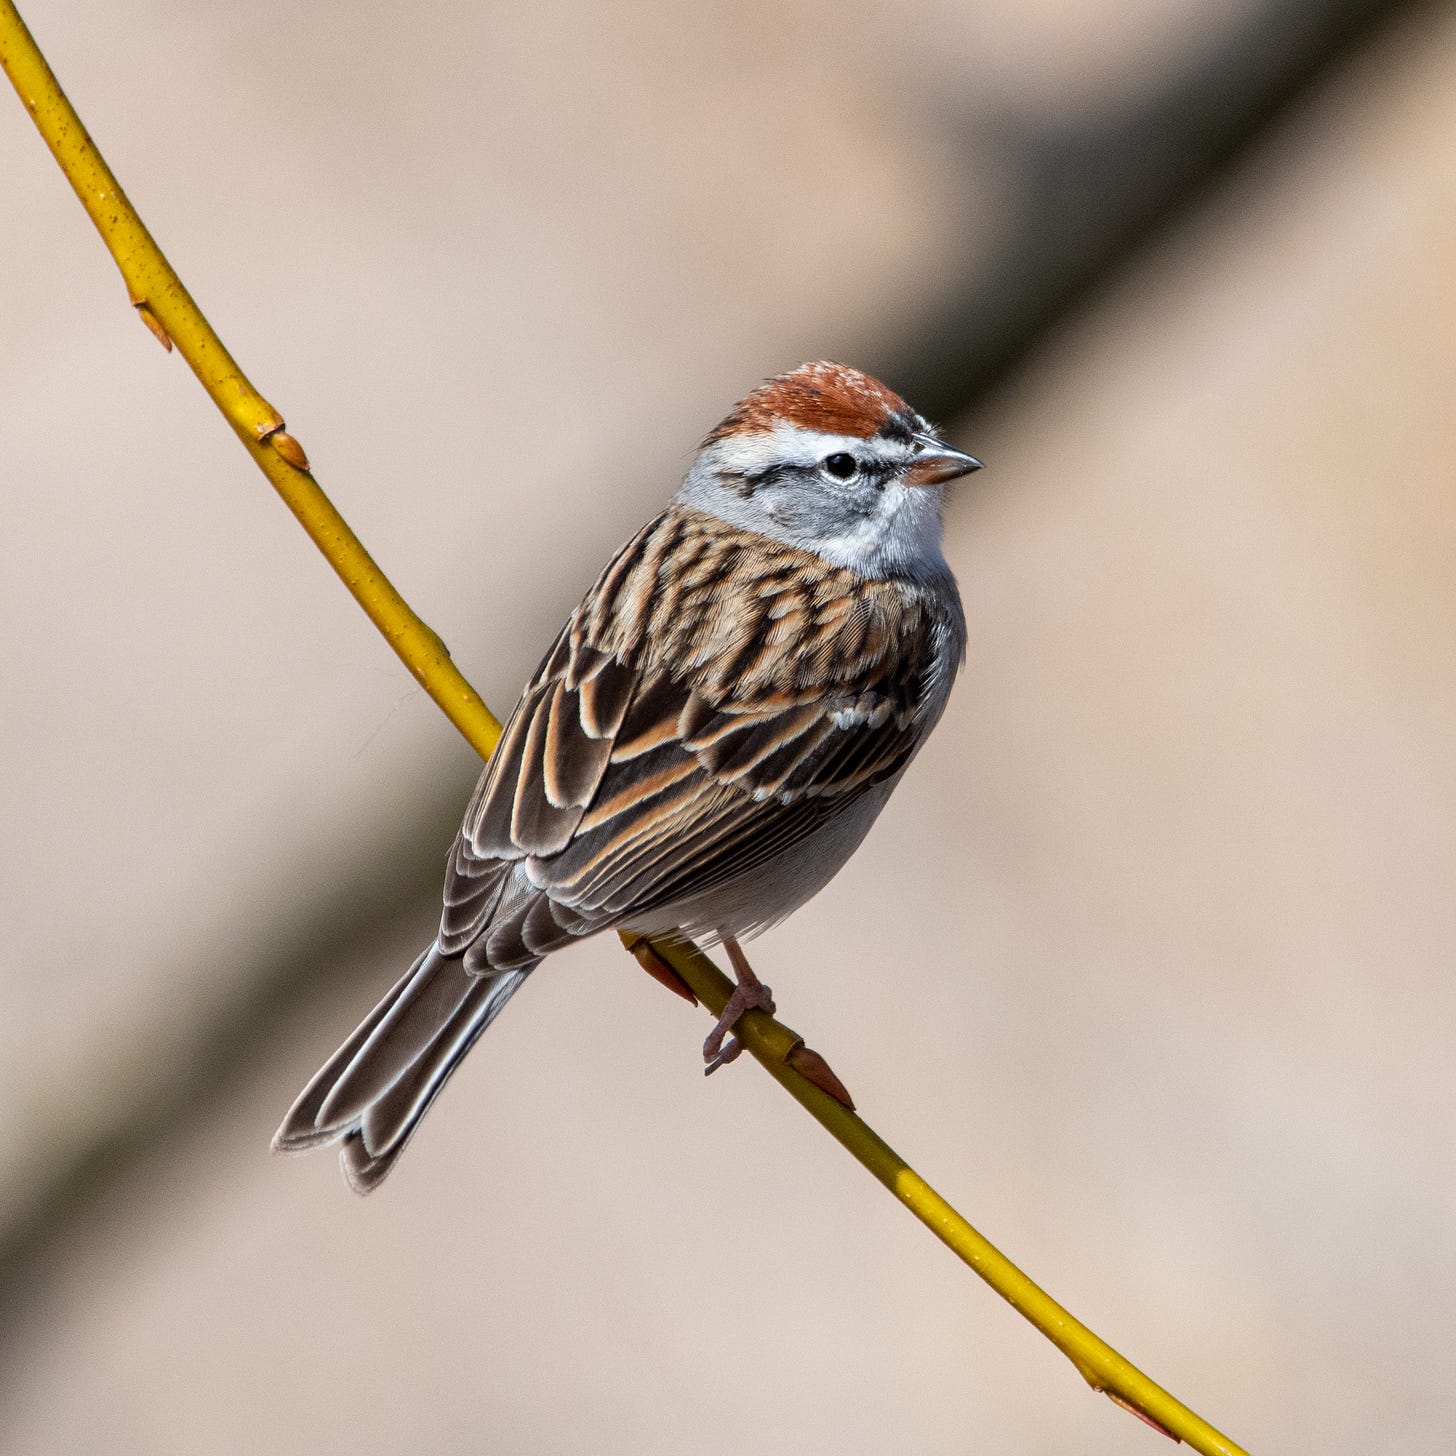 A chipping sparrow, with a bright russet crown, perched in the X of two crossed tree stems, looking over its shoulder toward the camera